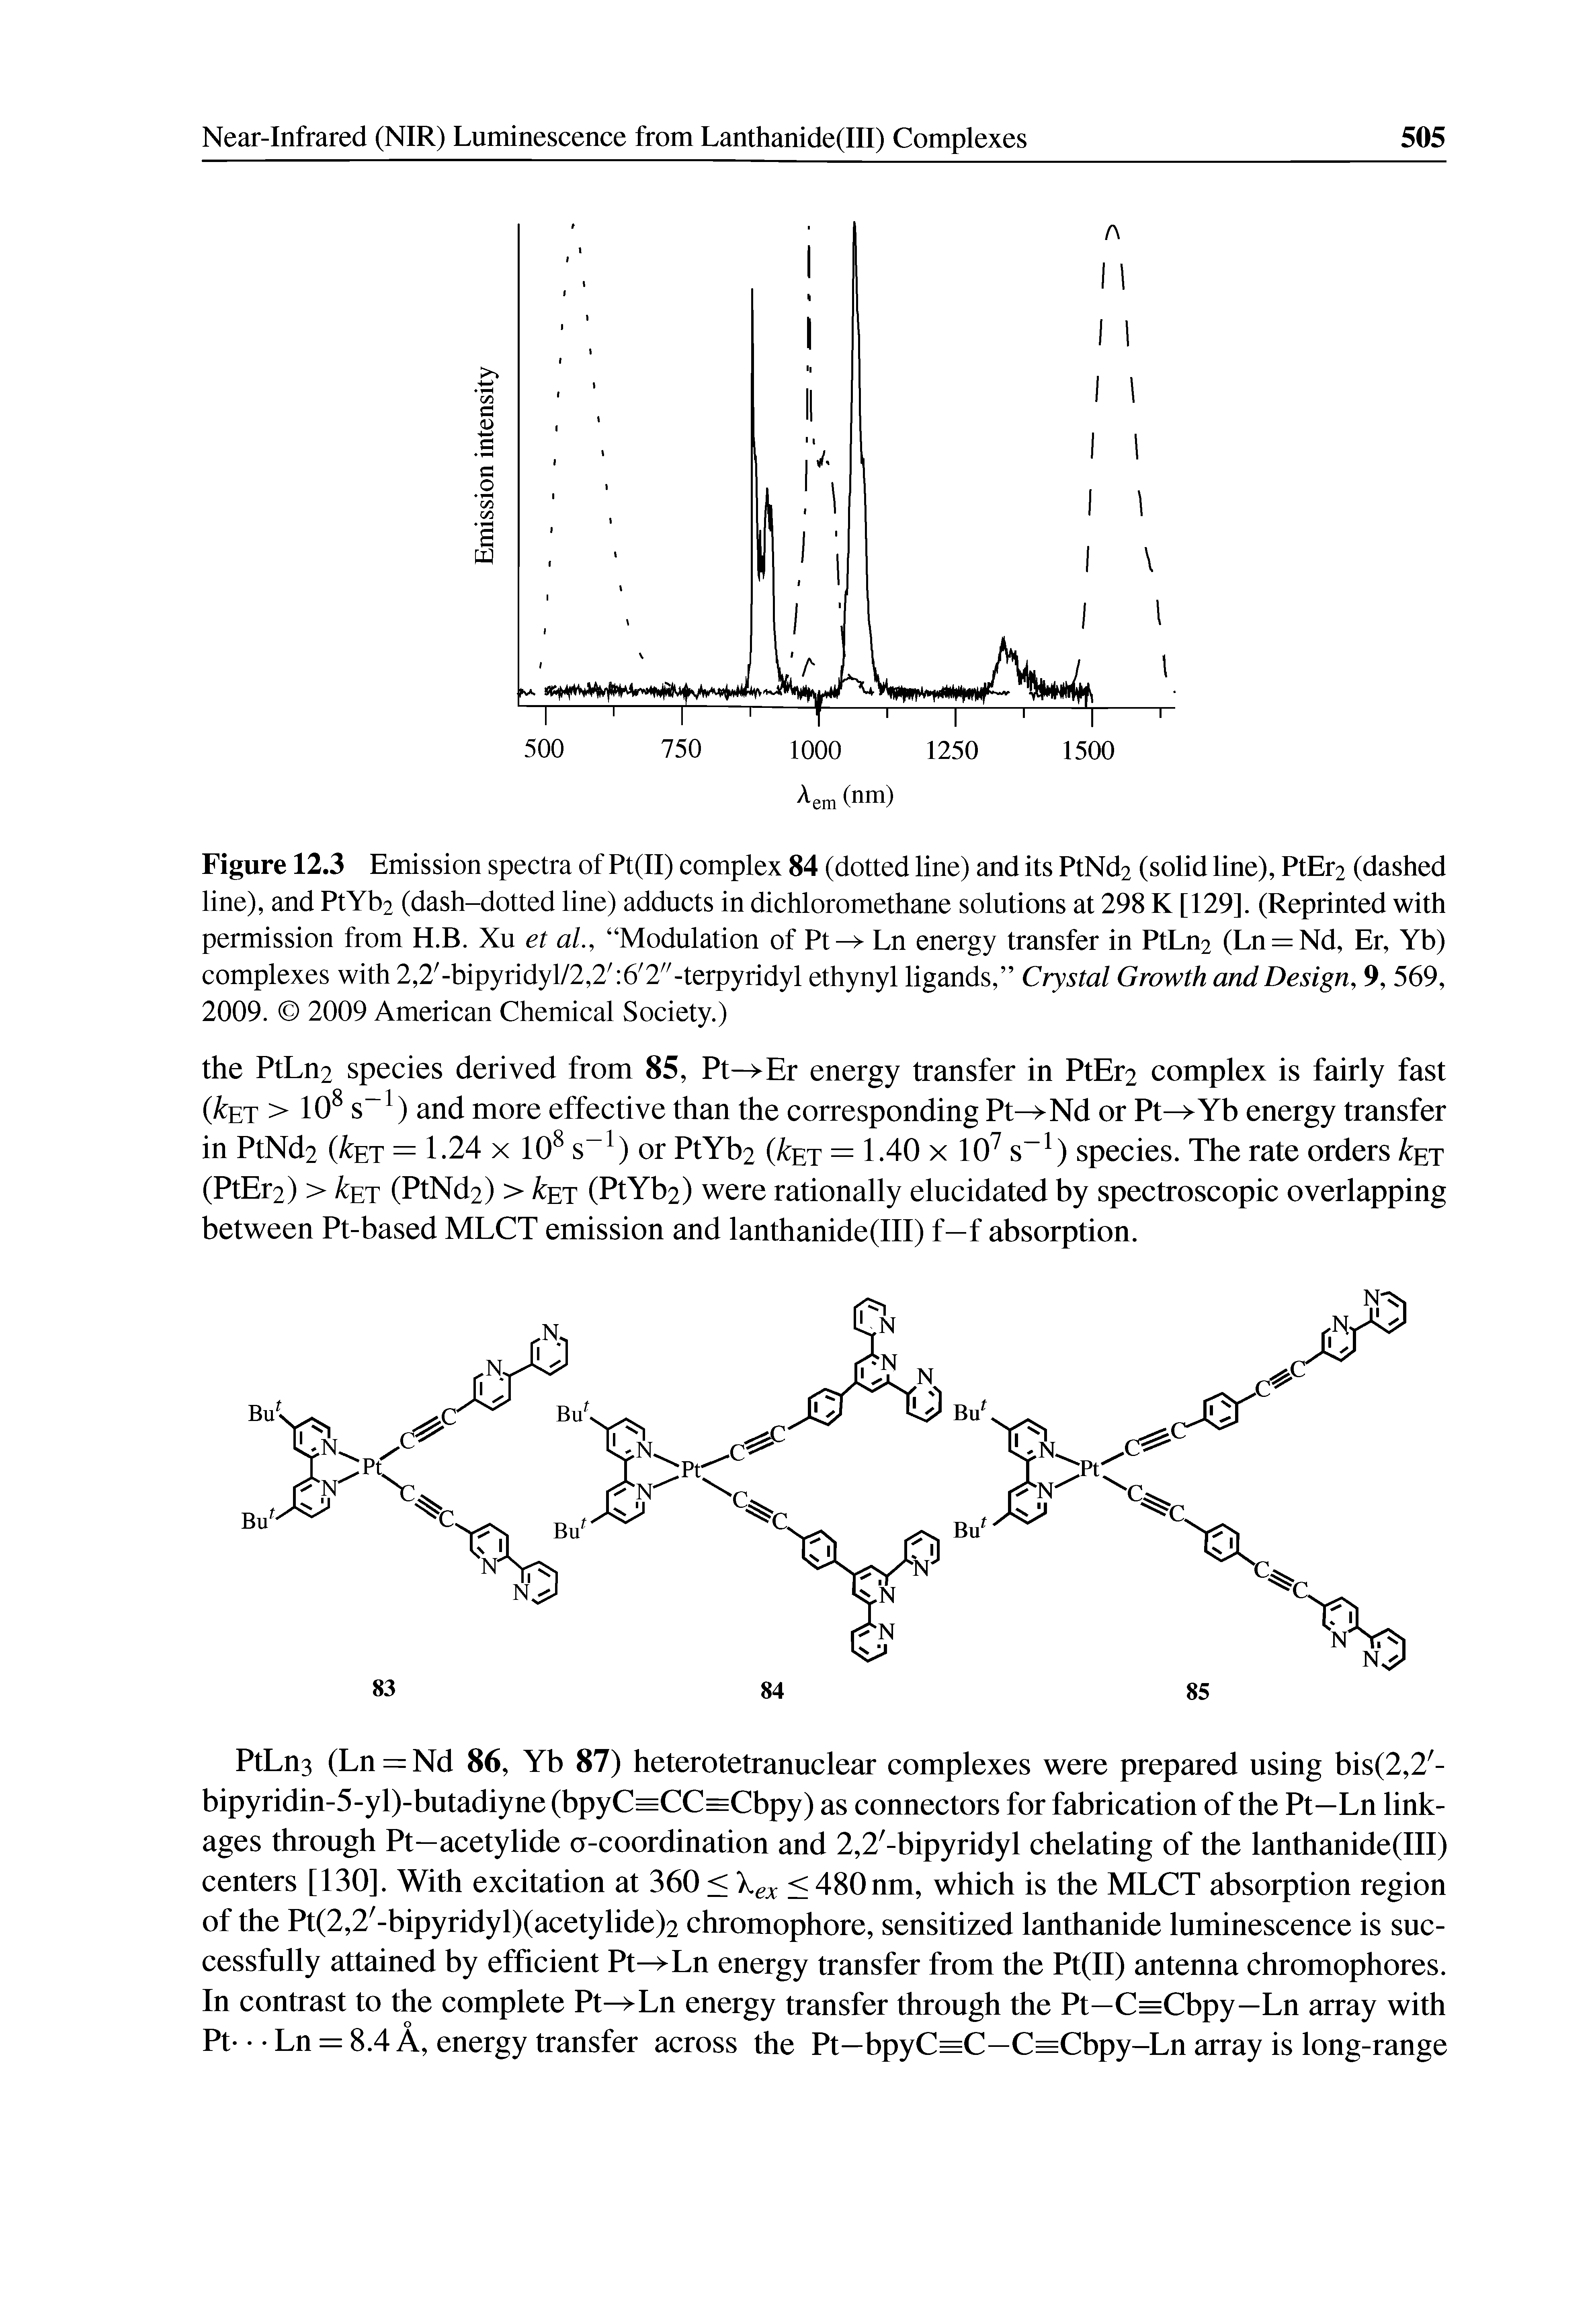 Figure 12.3 Emission spectra of Pt(II) complex 84 (dotted line) and its PtNd2 (solid line), PtEr2 (dashed line), and PtYb2 (dash-dotted line) adducts in dichloromethane solutions at 298 K [129]. (Reprinted with permission from H.B. Xu et aL, Modulation of Pt Ln energy transfer in PtLn2 (Ln = Nd, Er, Yb) complexes with 2,2 -bipyridyl/2,2 6 2 -terpyridyl ethynyl ligands, Crystal Growth and Design, 9, 569, 2009. 2009 American Chemical Society.)...